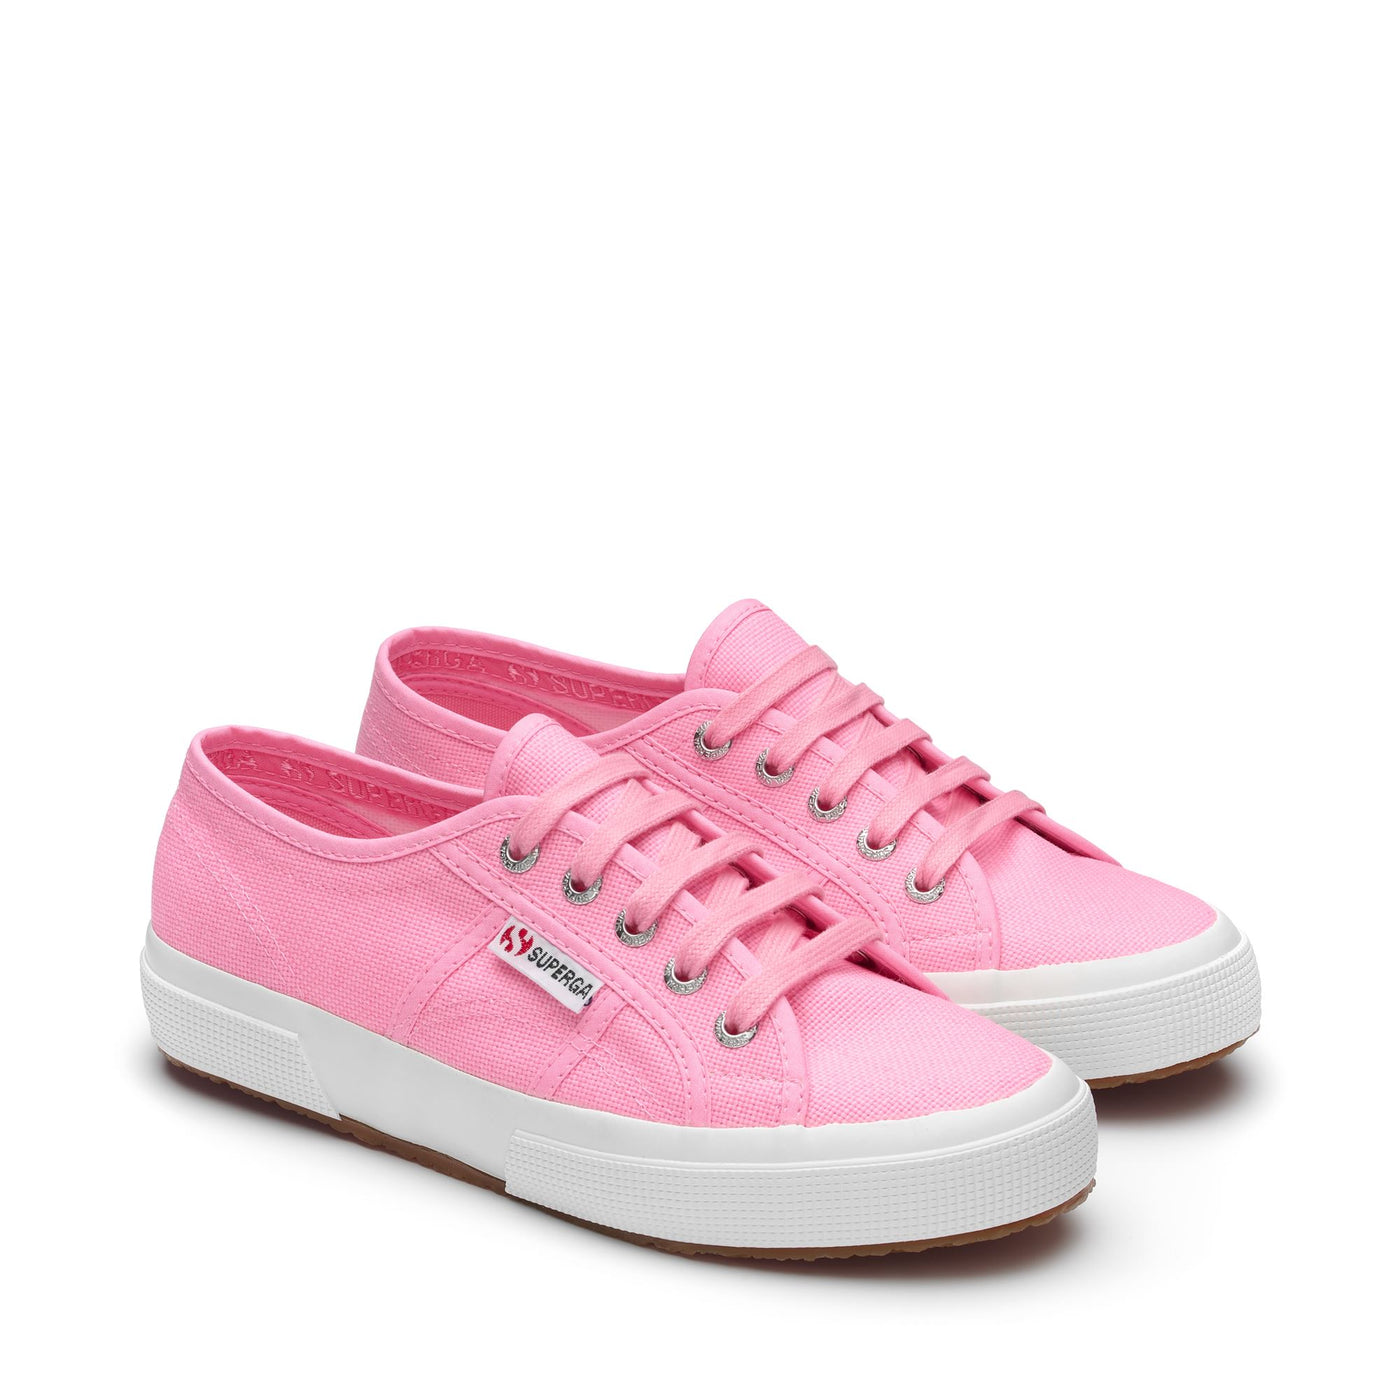 Le Superga Unisex 2750-COTU CLASSIC Sneaker COTTON CANDY Dressed Front (jpg Rgb)	